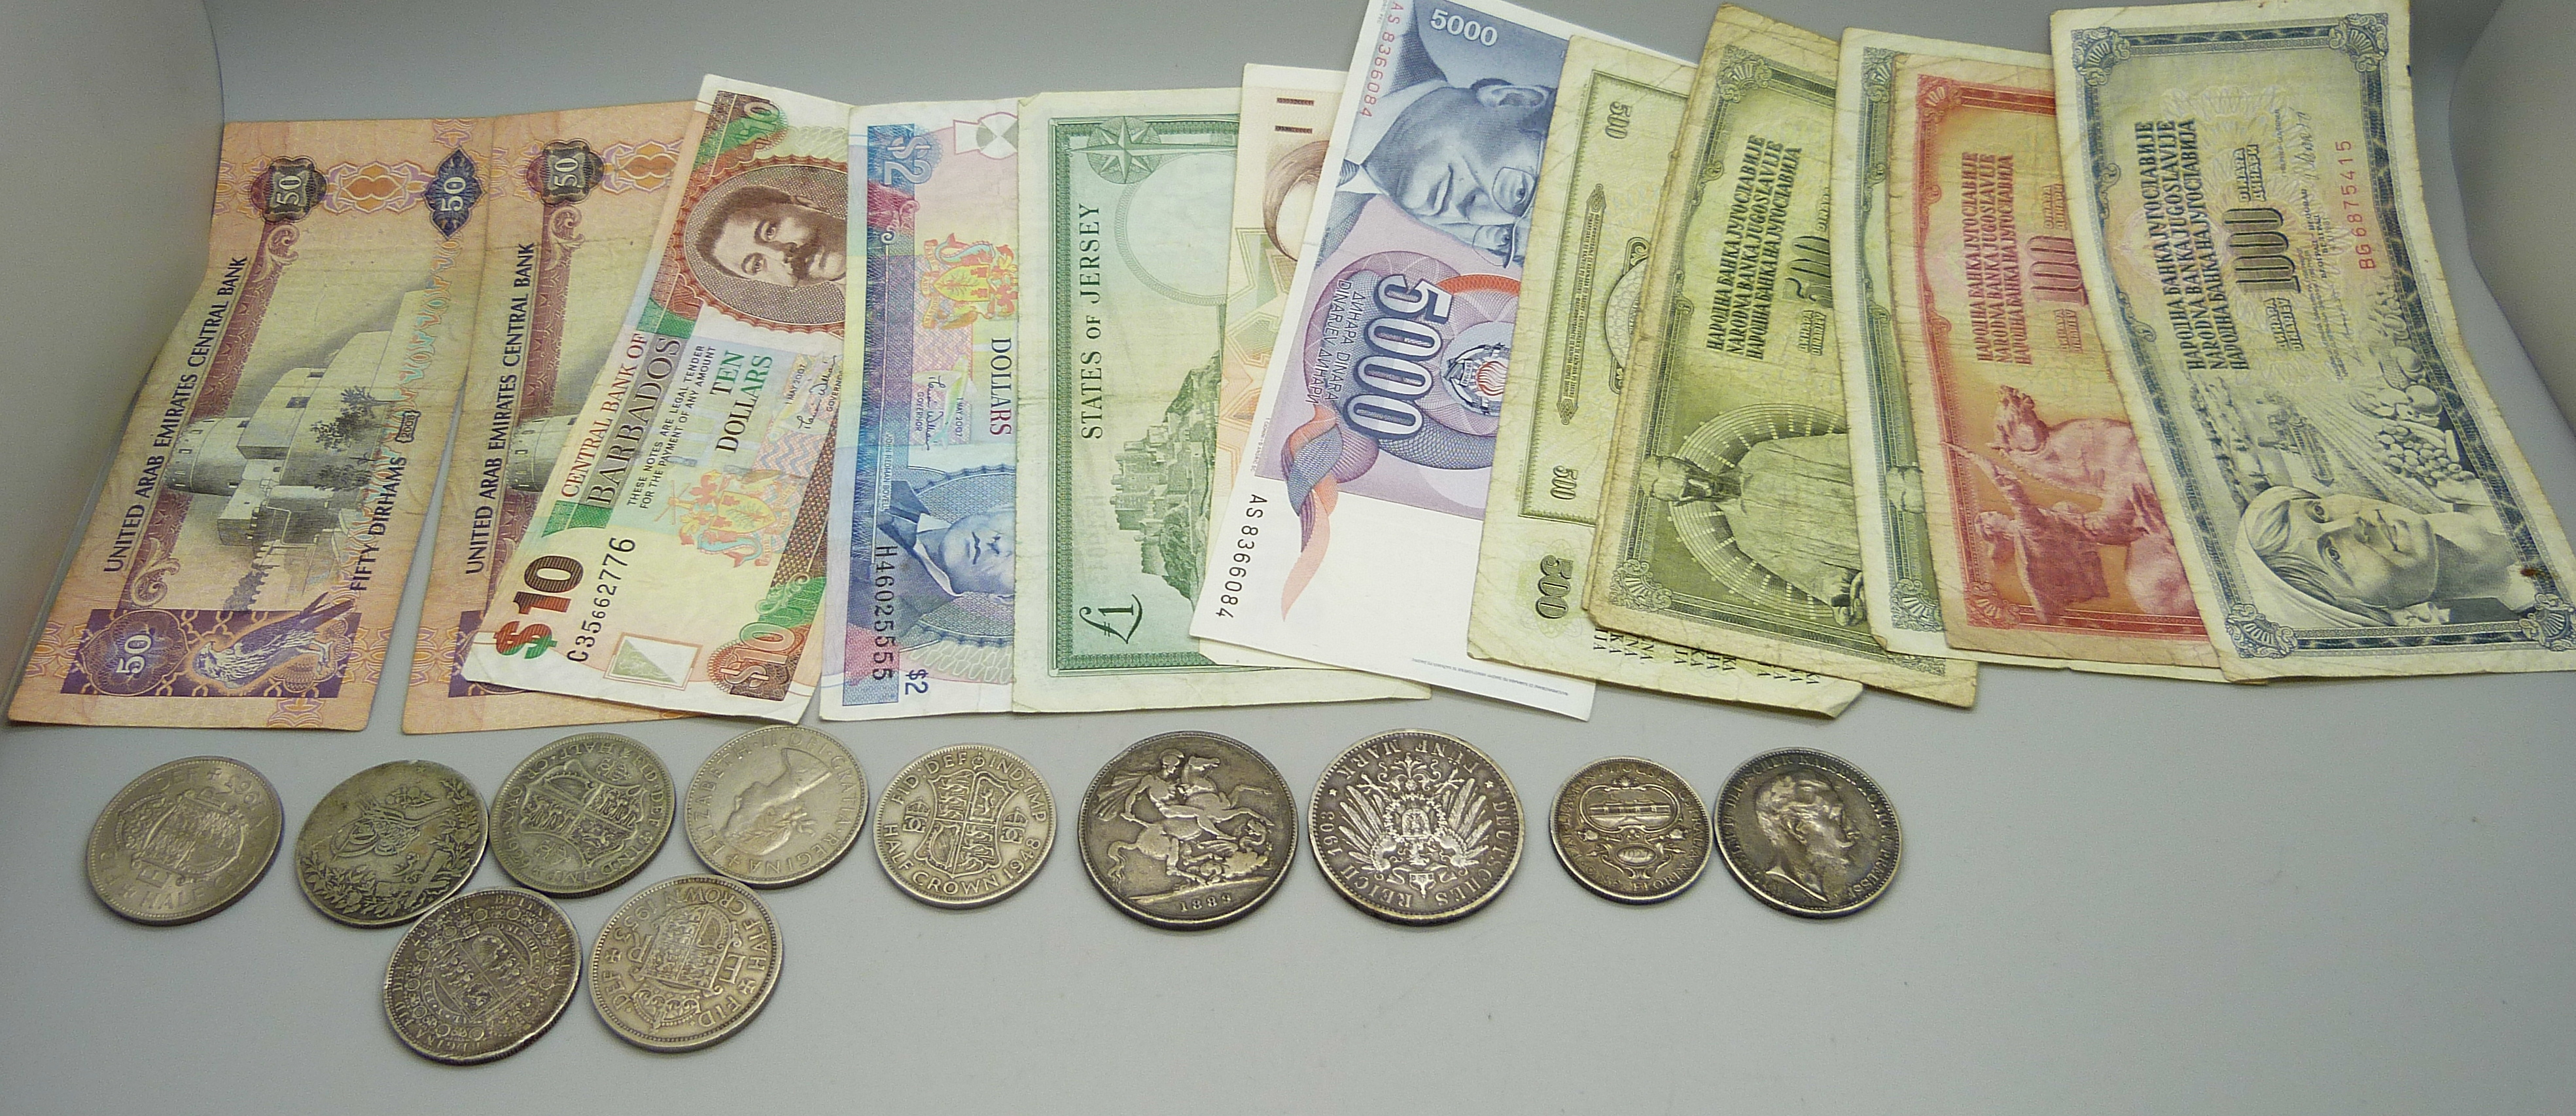 A collection of foreign bank notes, British and foreign coins including an 1889 crown and 1887